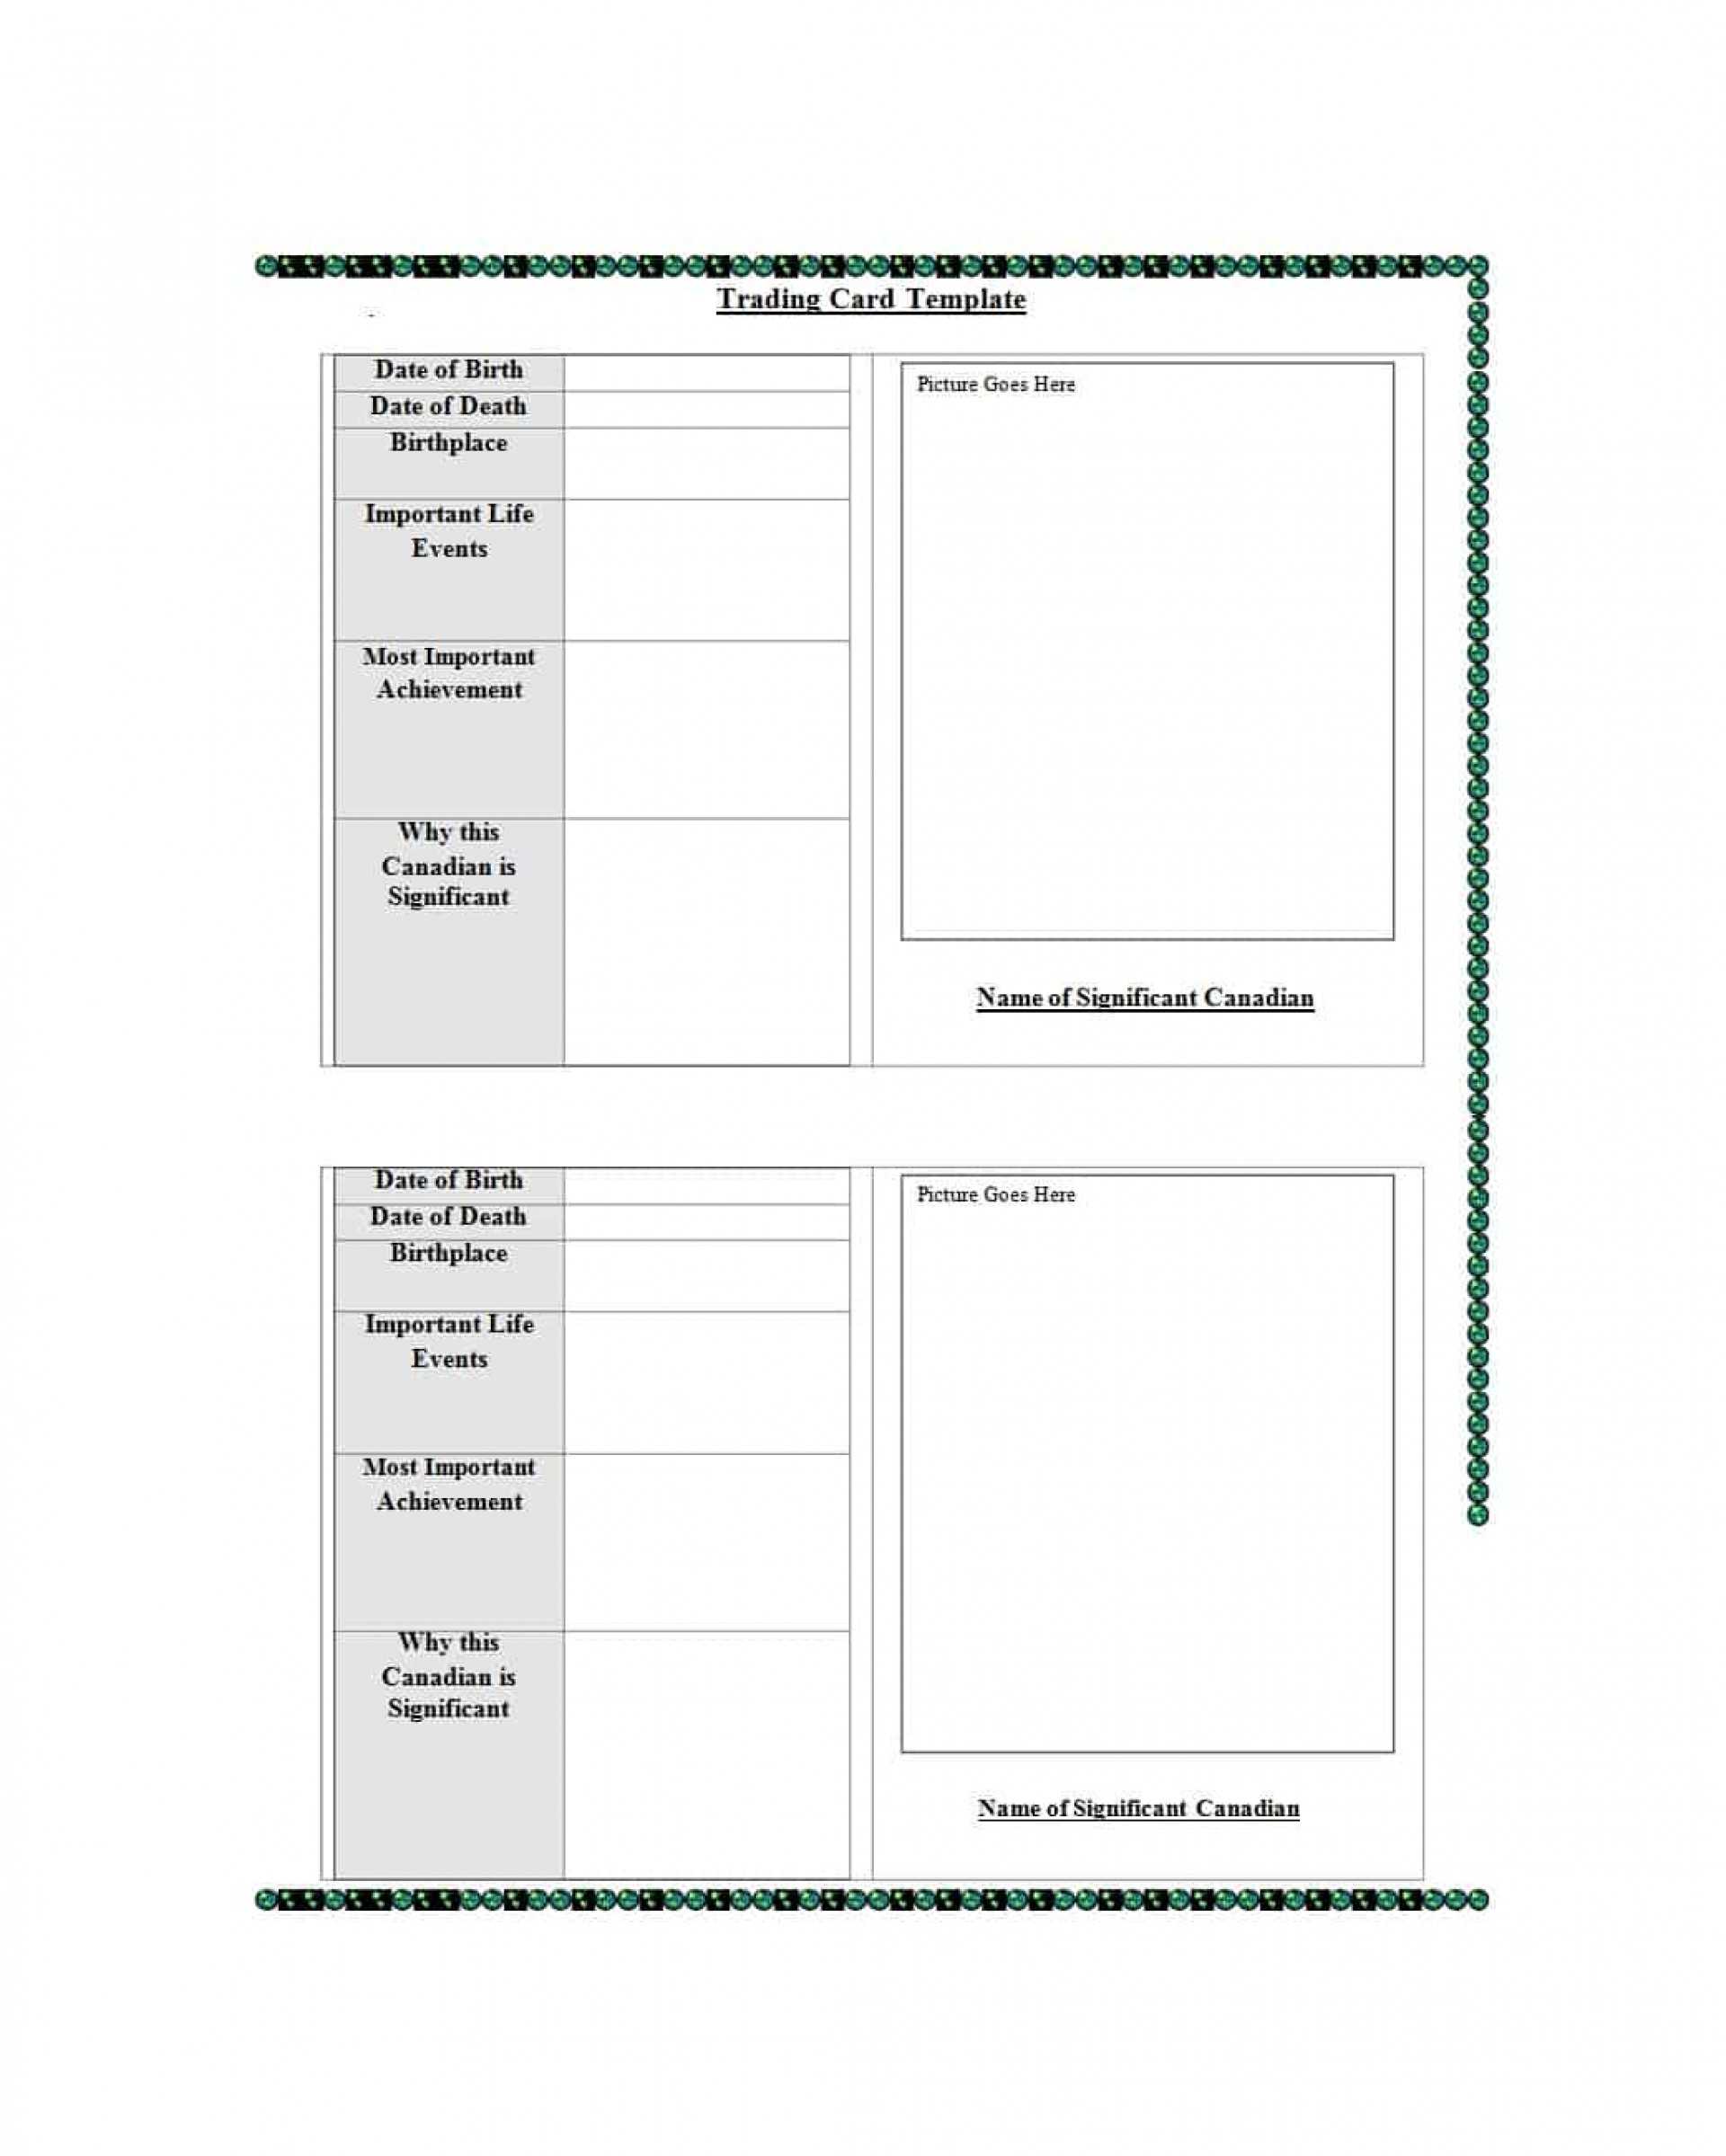 024 Baseball Trading Card Template Free Download Ideas Within Trading Cards Templates Free Download